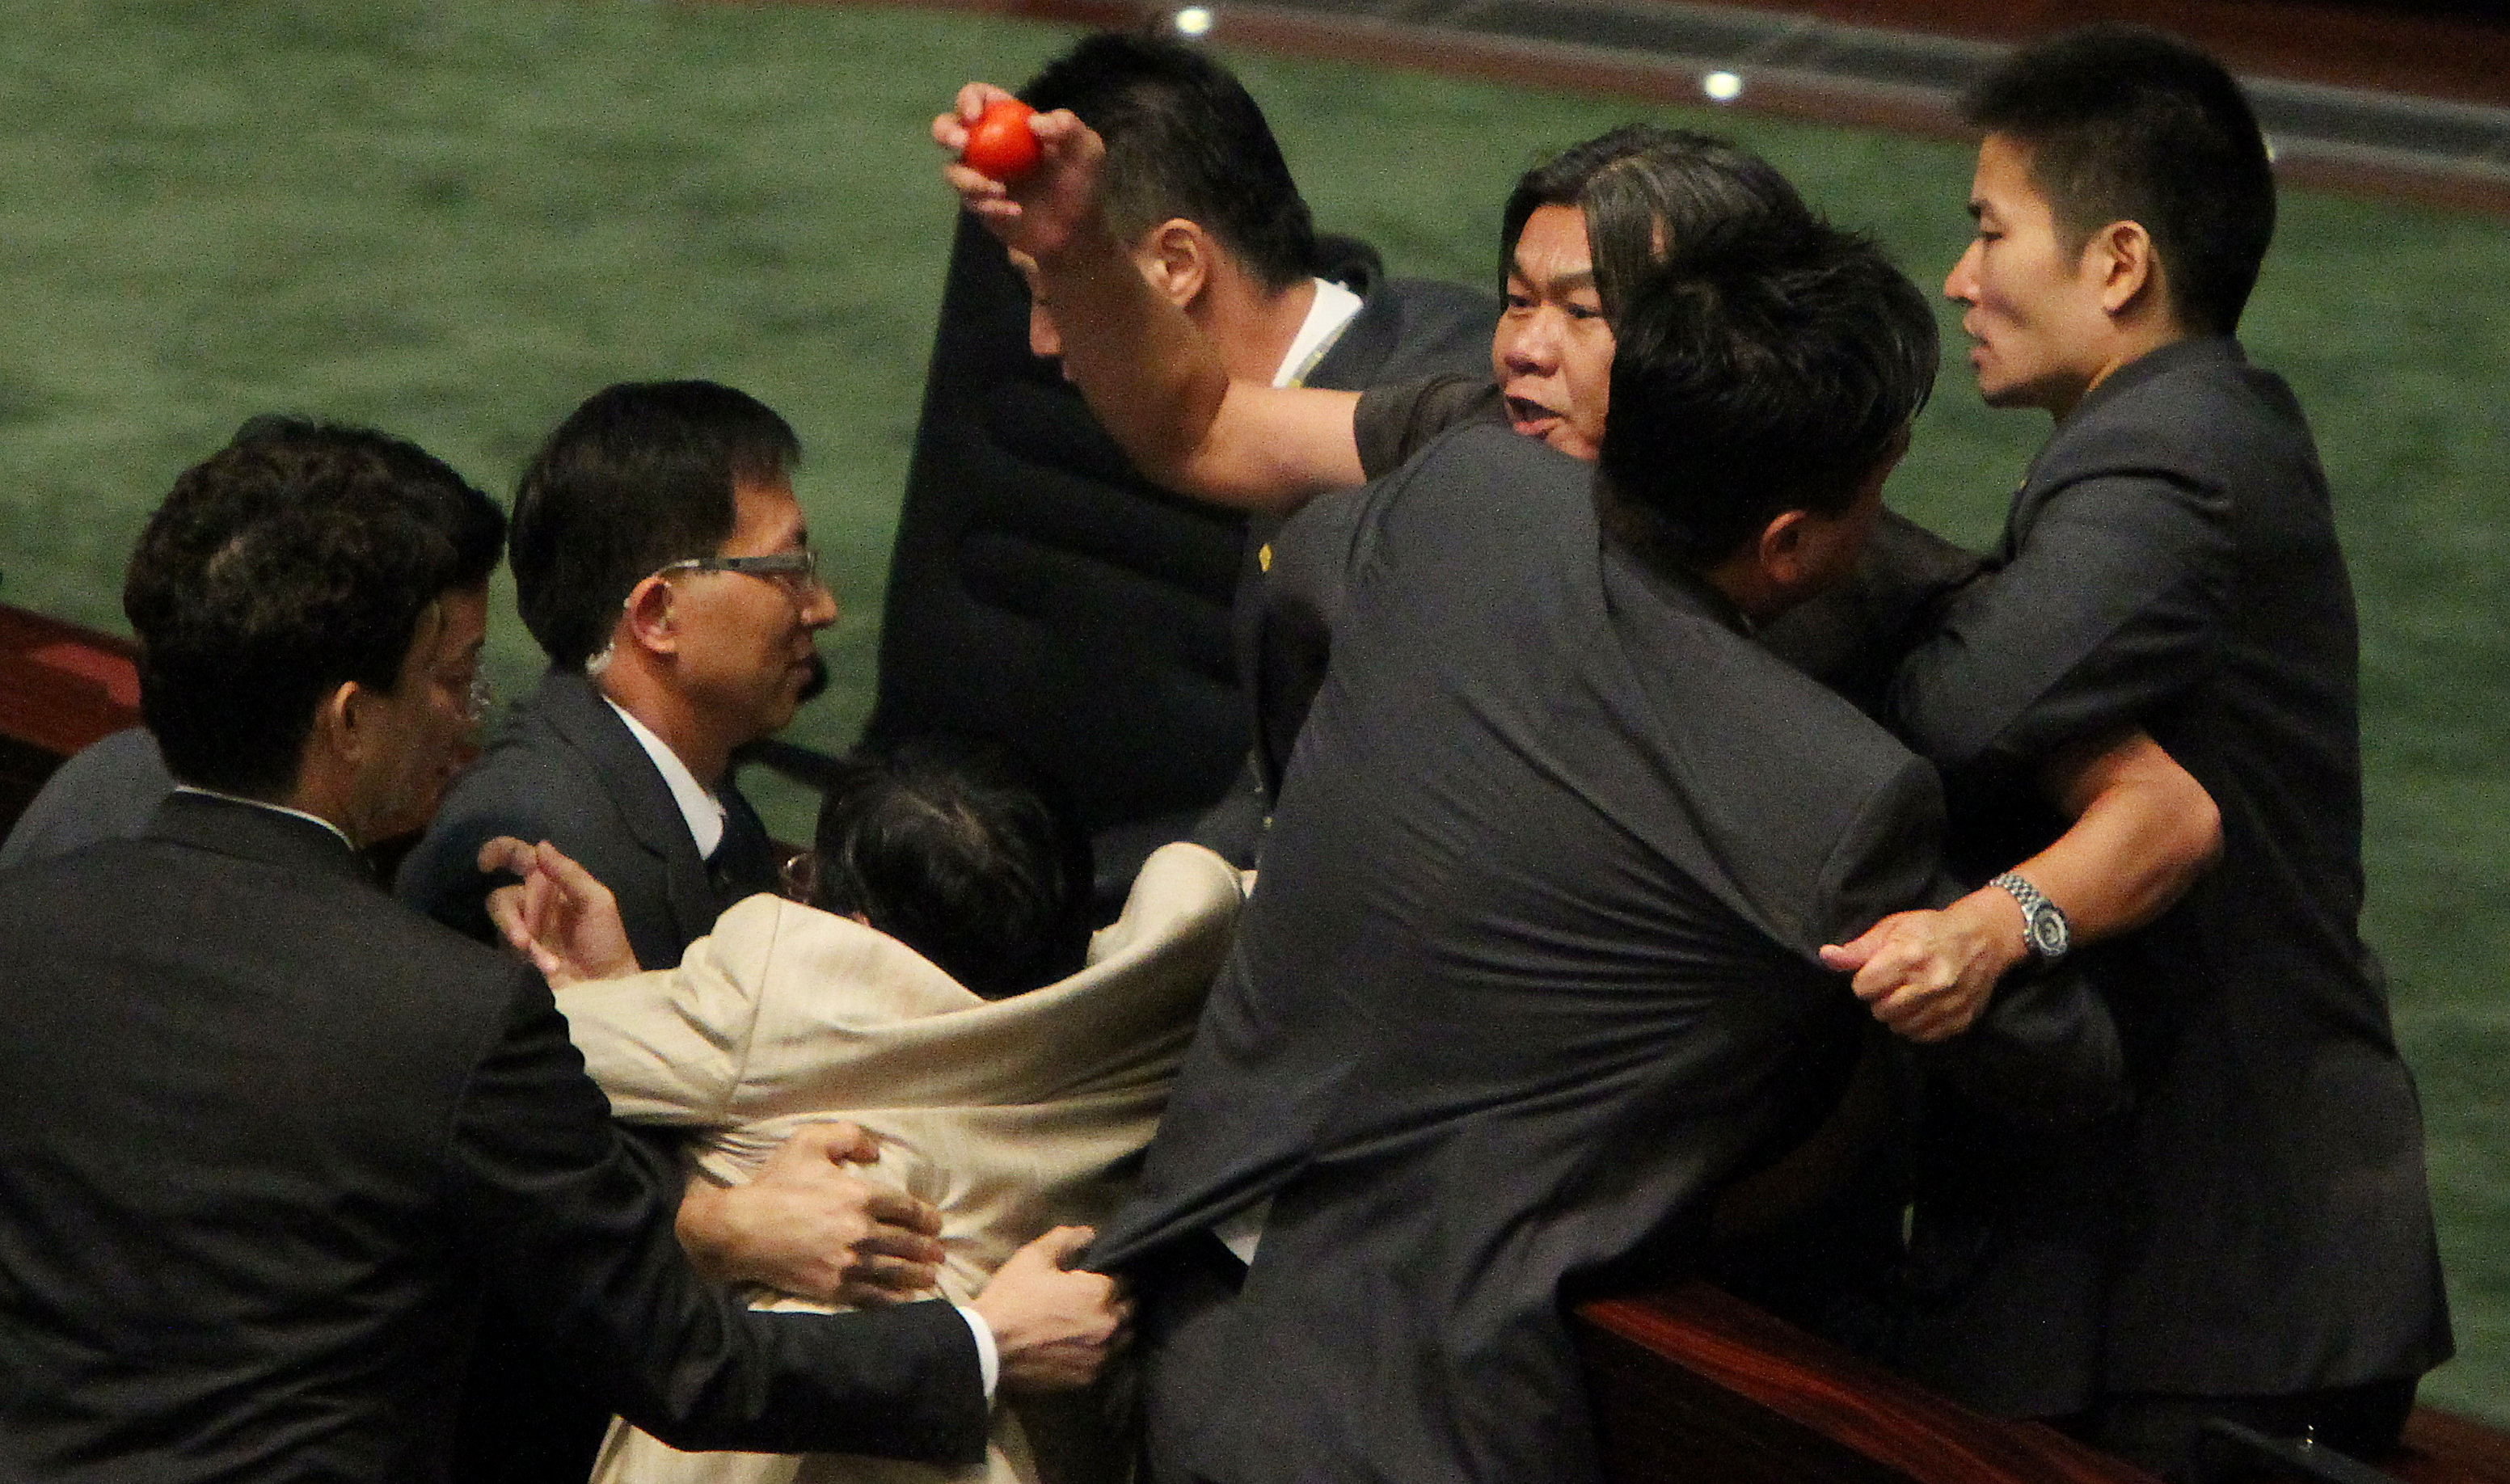 Many see political stunts in the Legislative Council as an alarming sign of social decay. Photo: Felix Wong